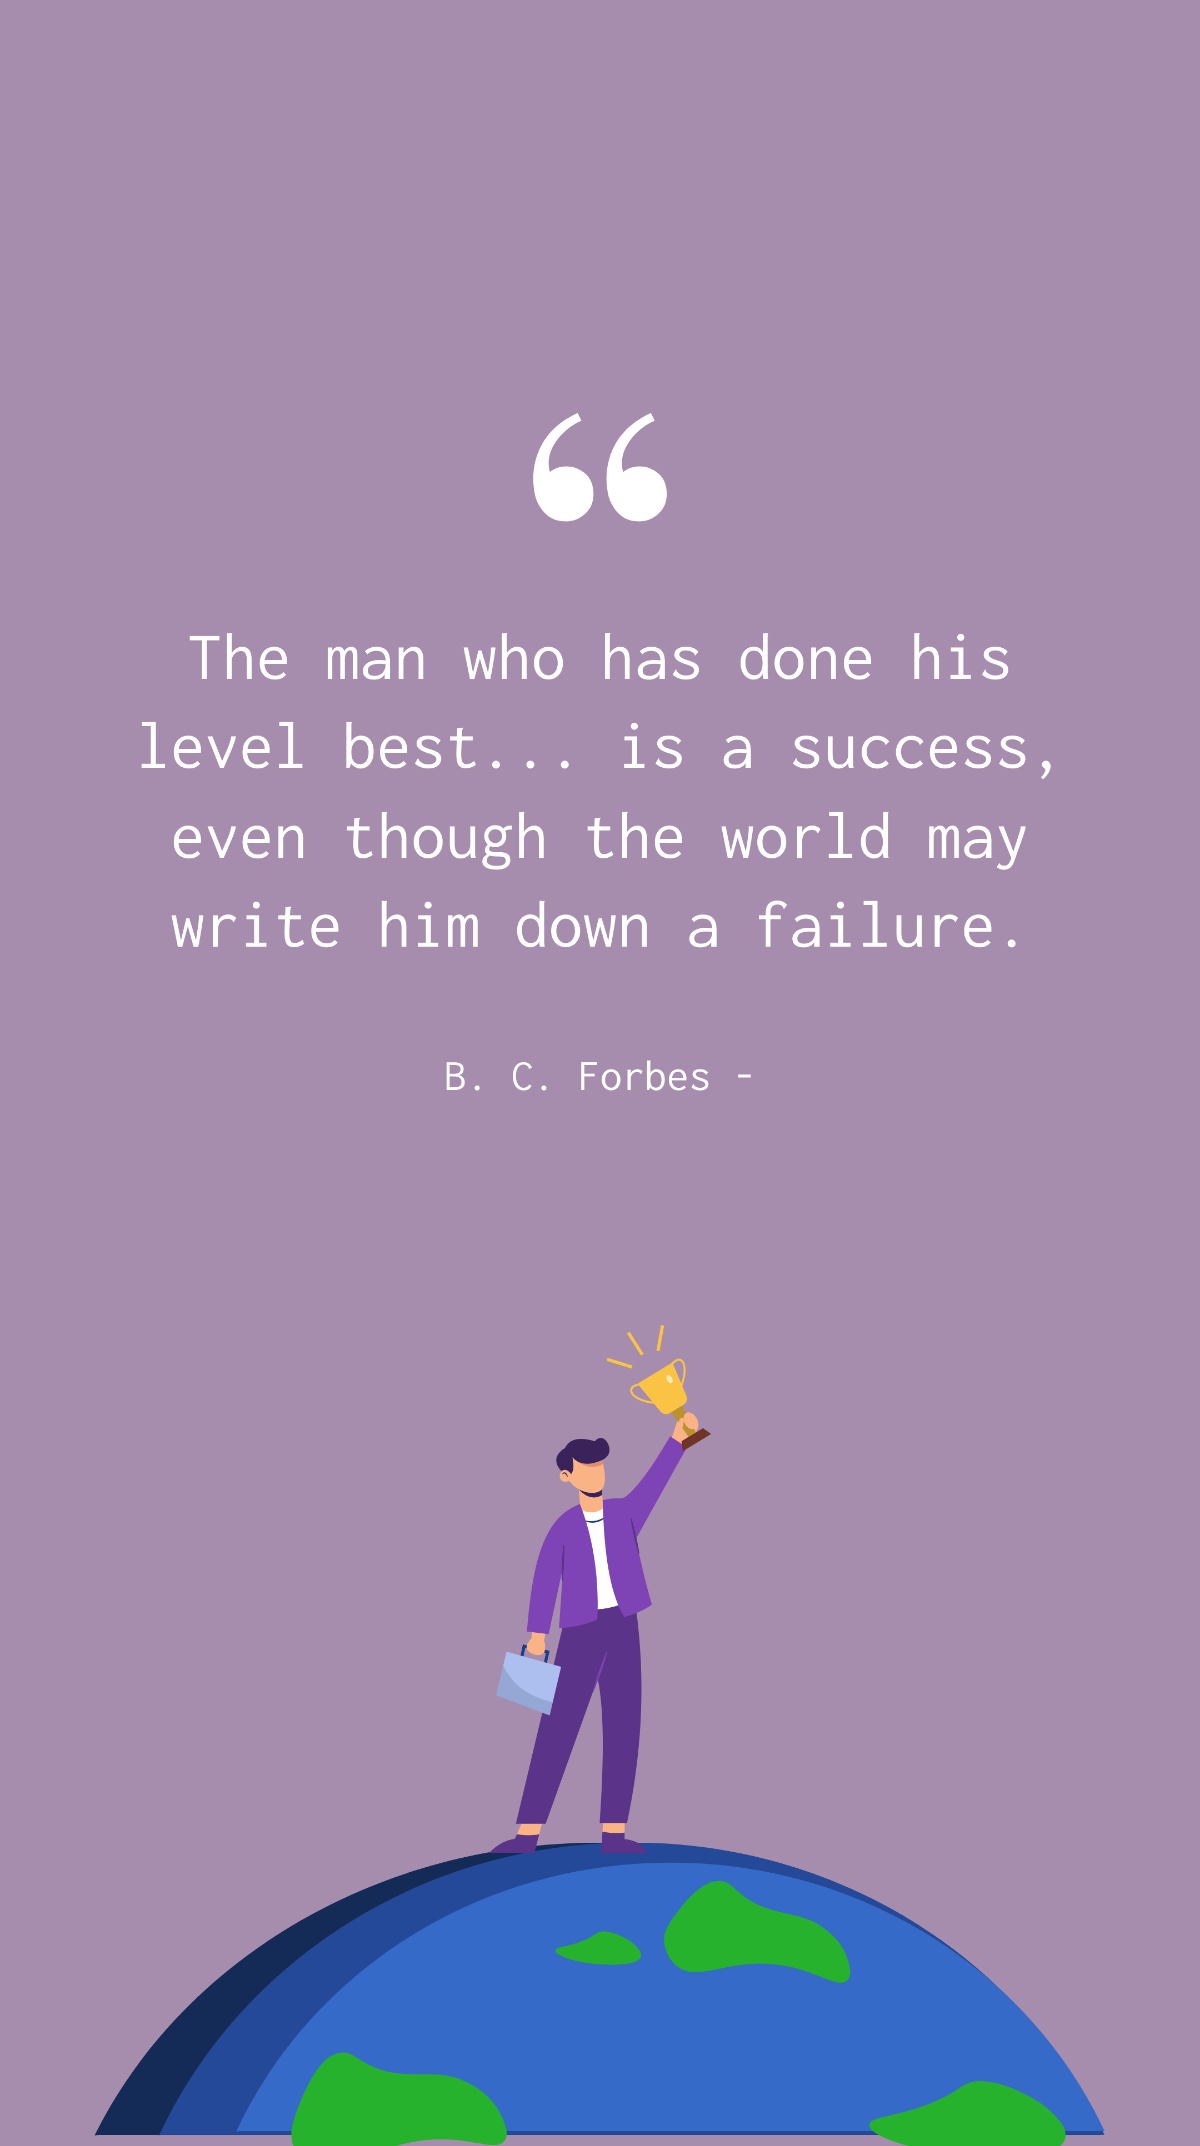 B. C. Forbes - The man who has done his level best... is a success, even though the world may write him down a failure. Template